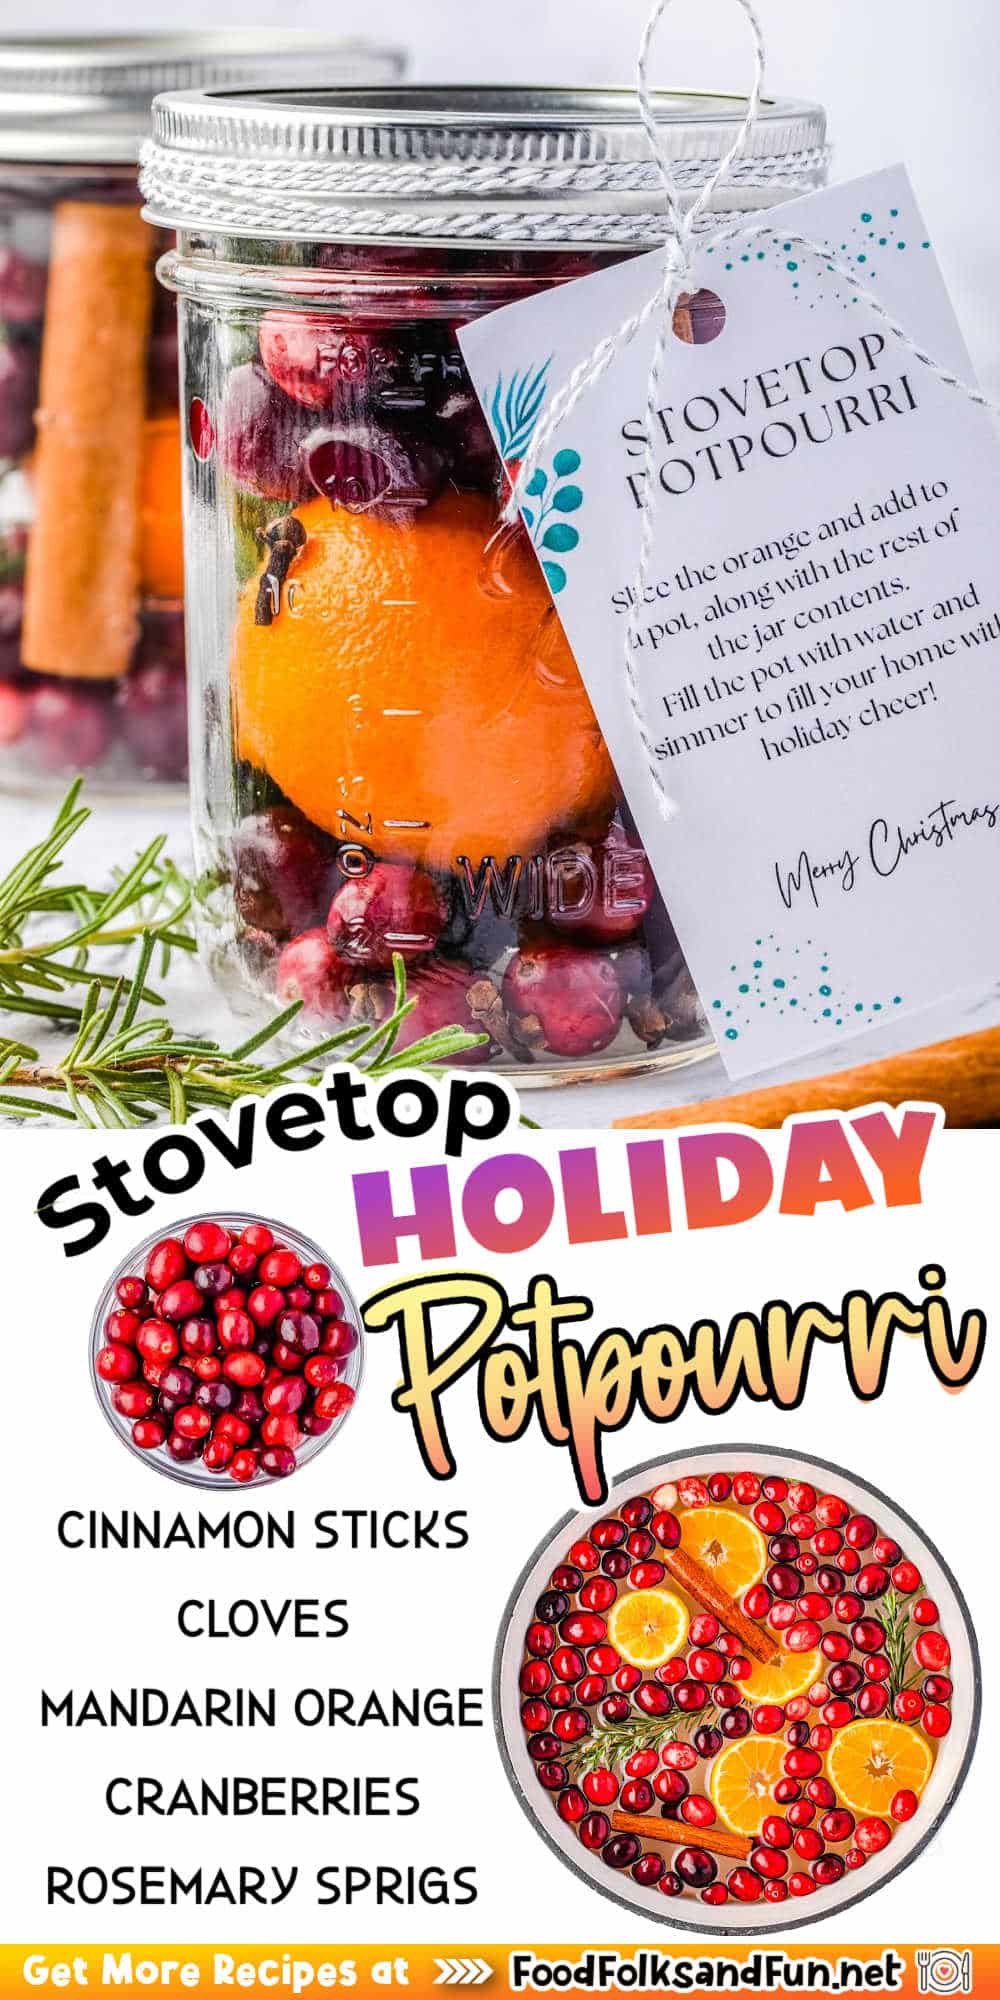 This Holiday Potpourri is the quickest way to make your house smell like Christmas! It’s perfect for neighbor’s gifts, complete with printable gift tags! via @foodfolksandfun